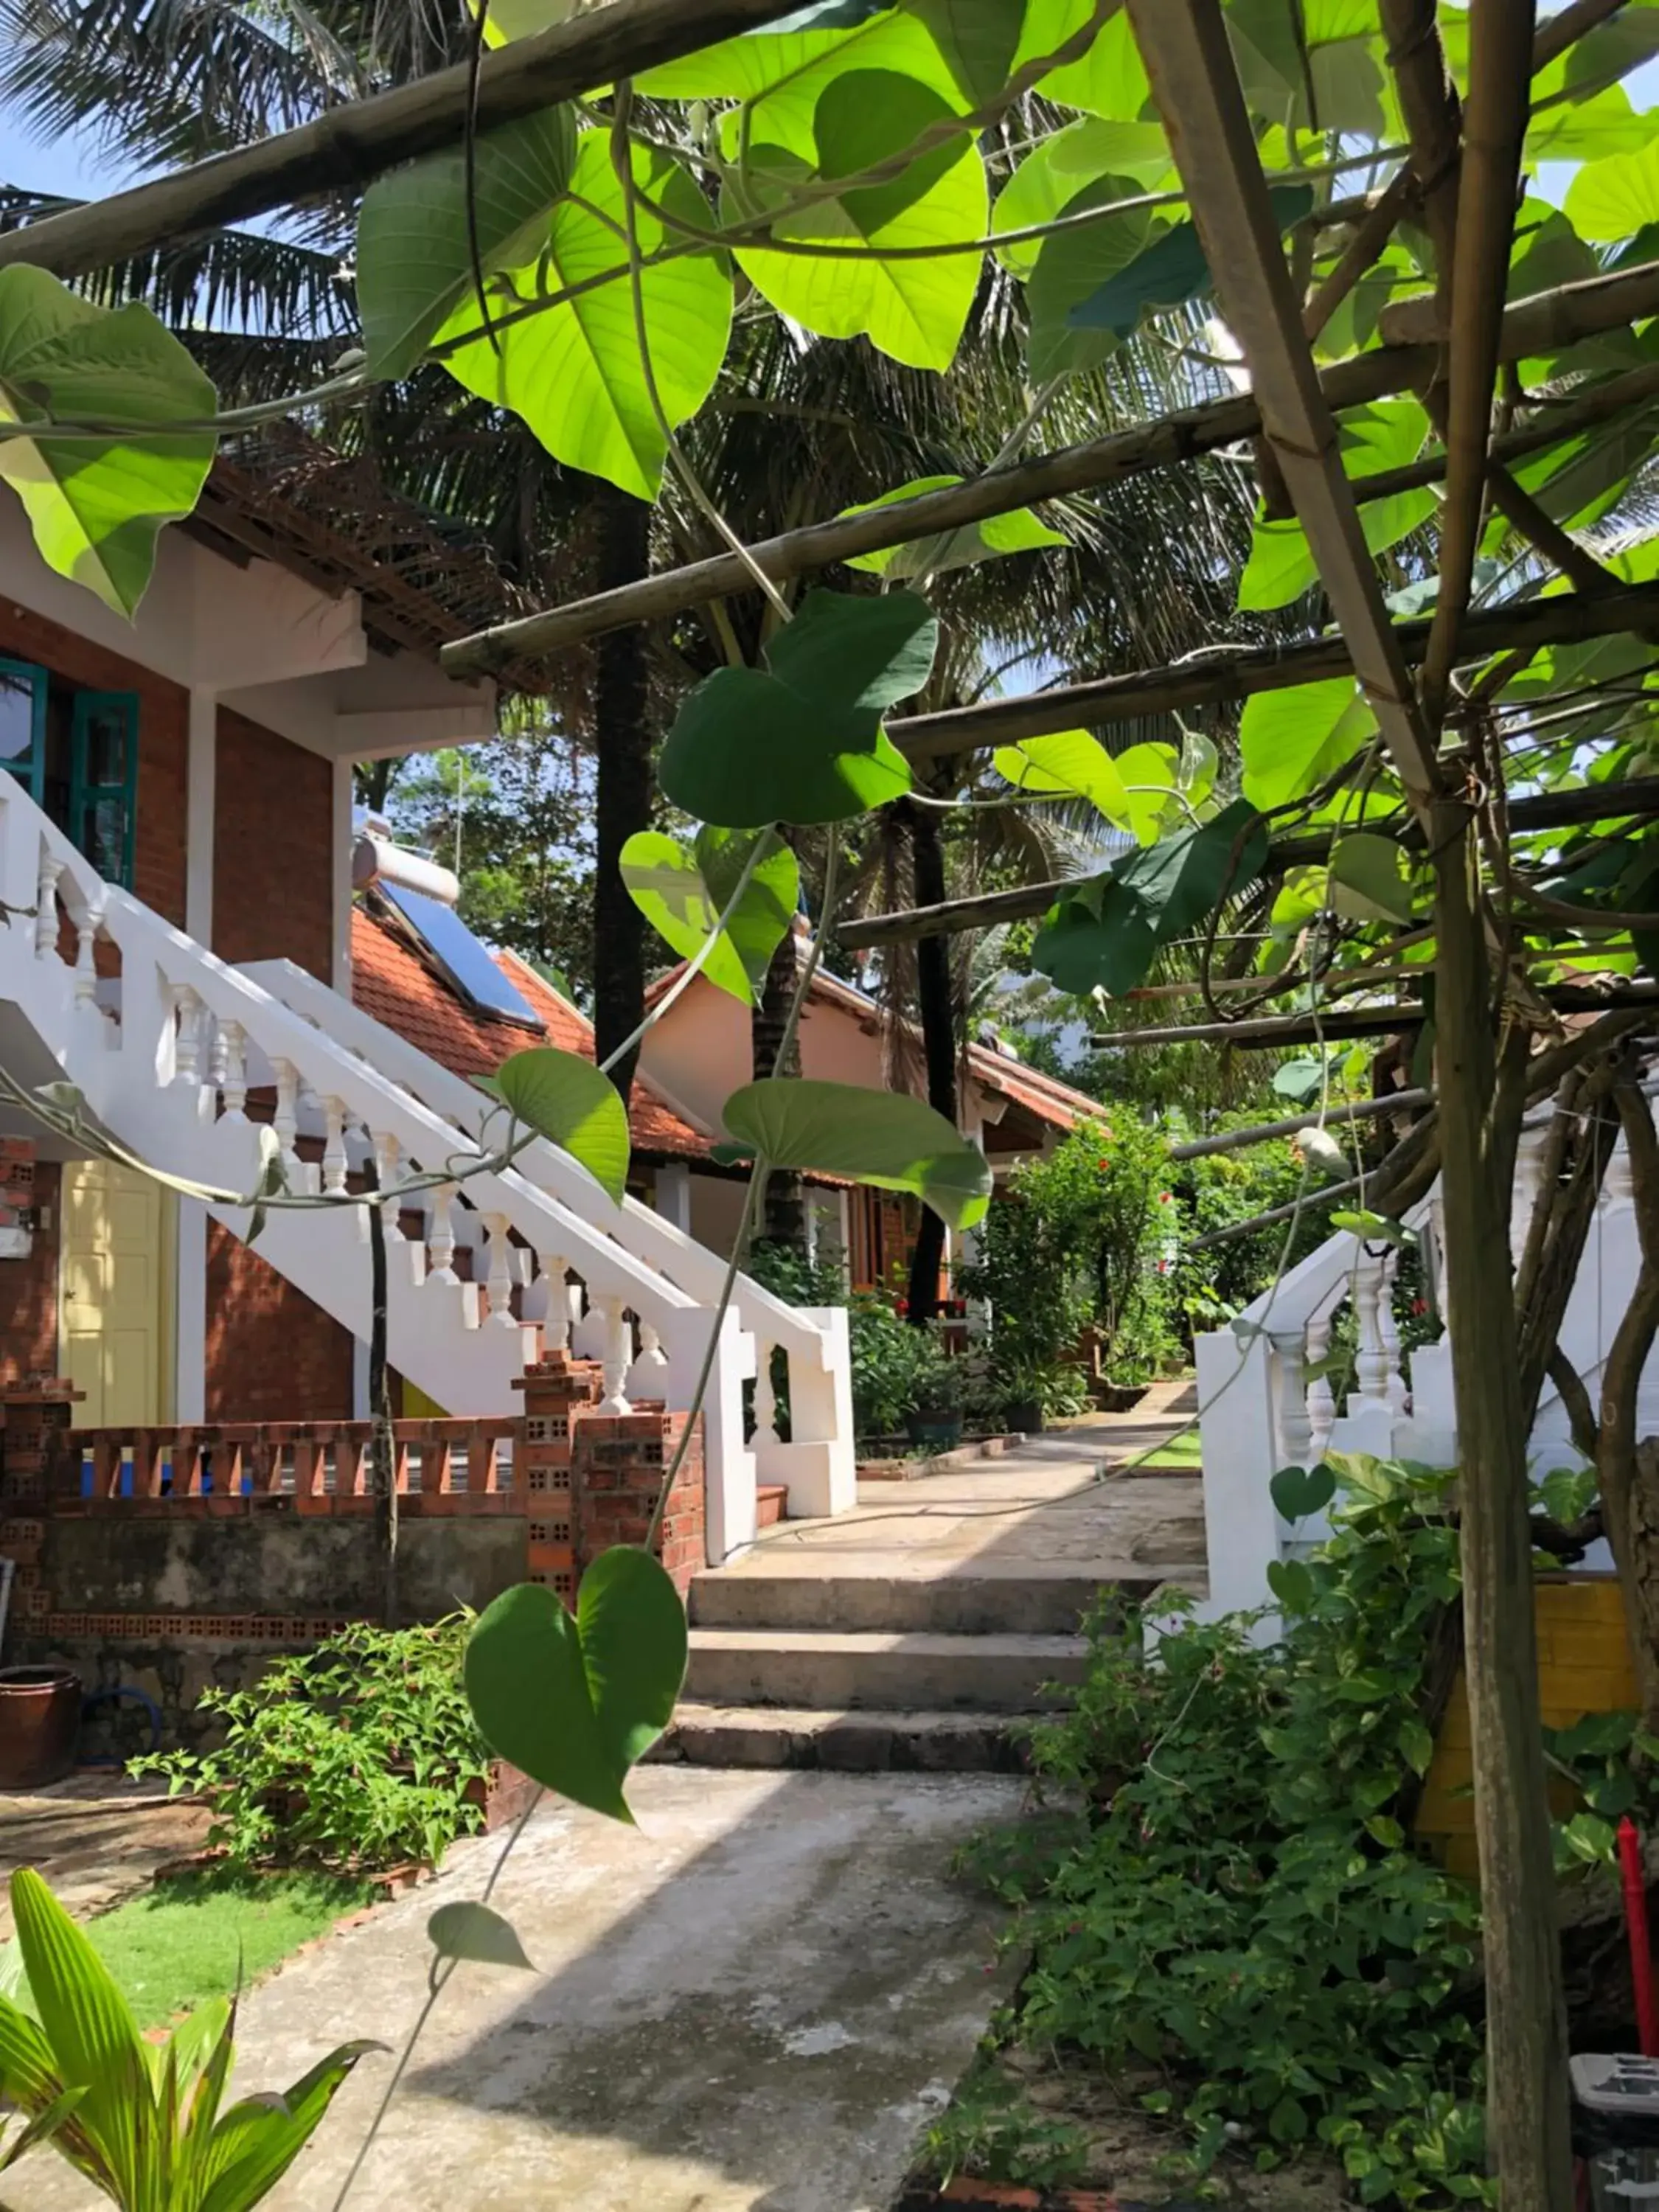 Property Building in Phu Quoc Kim - Bungalow On The Beach